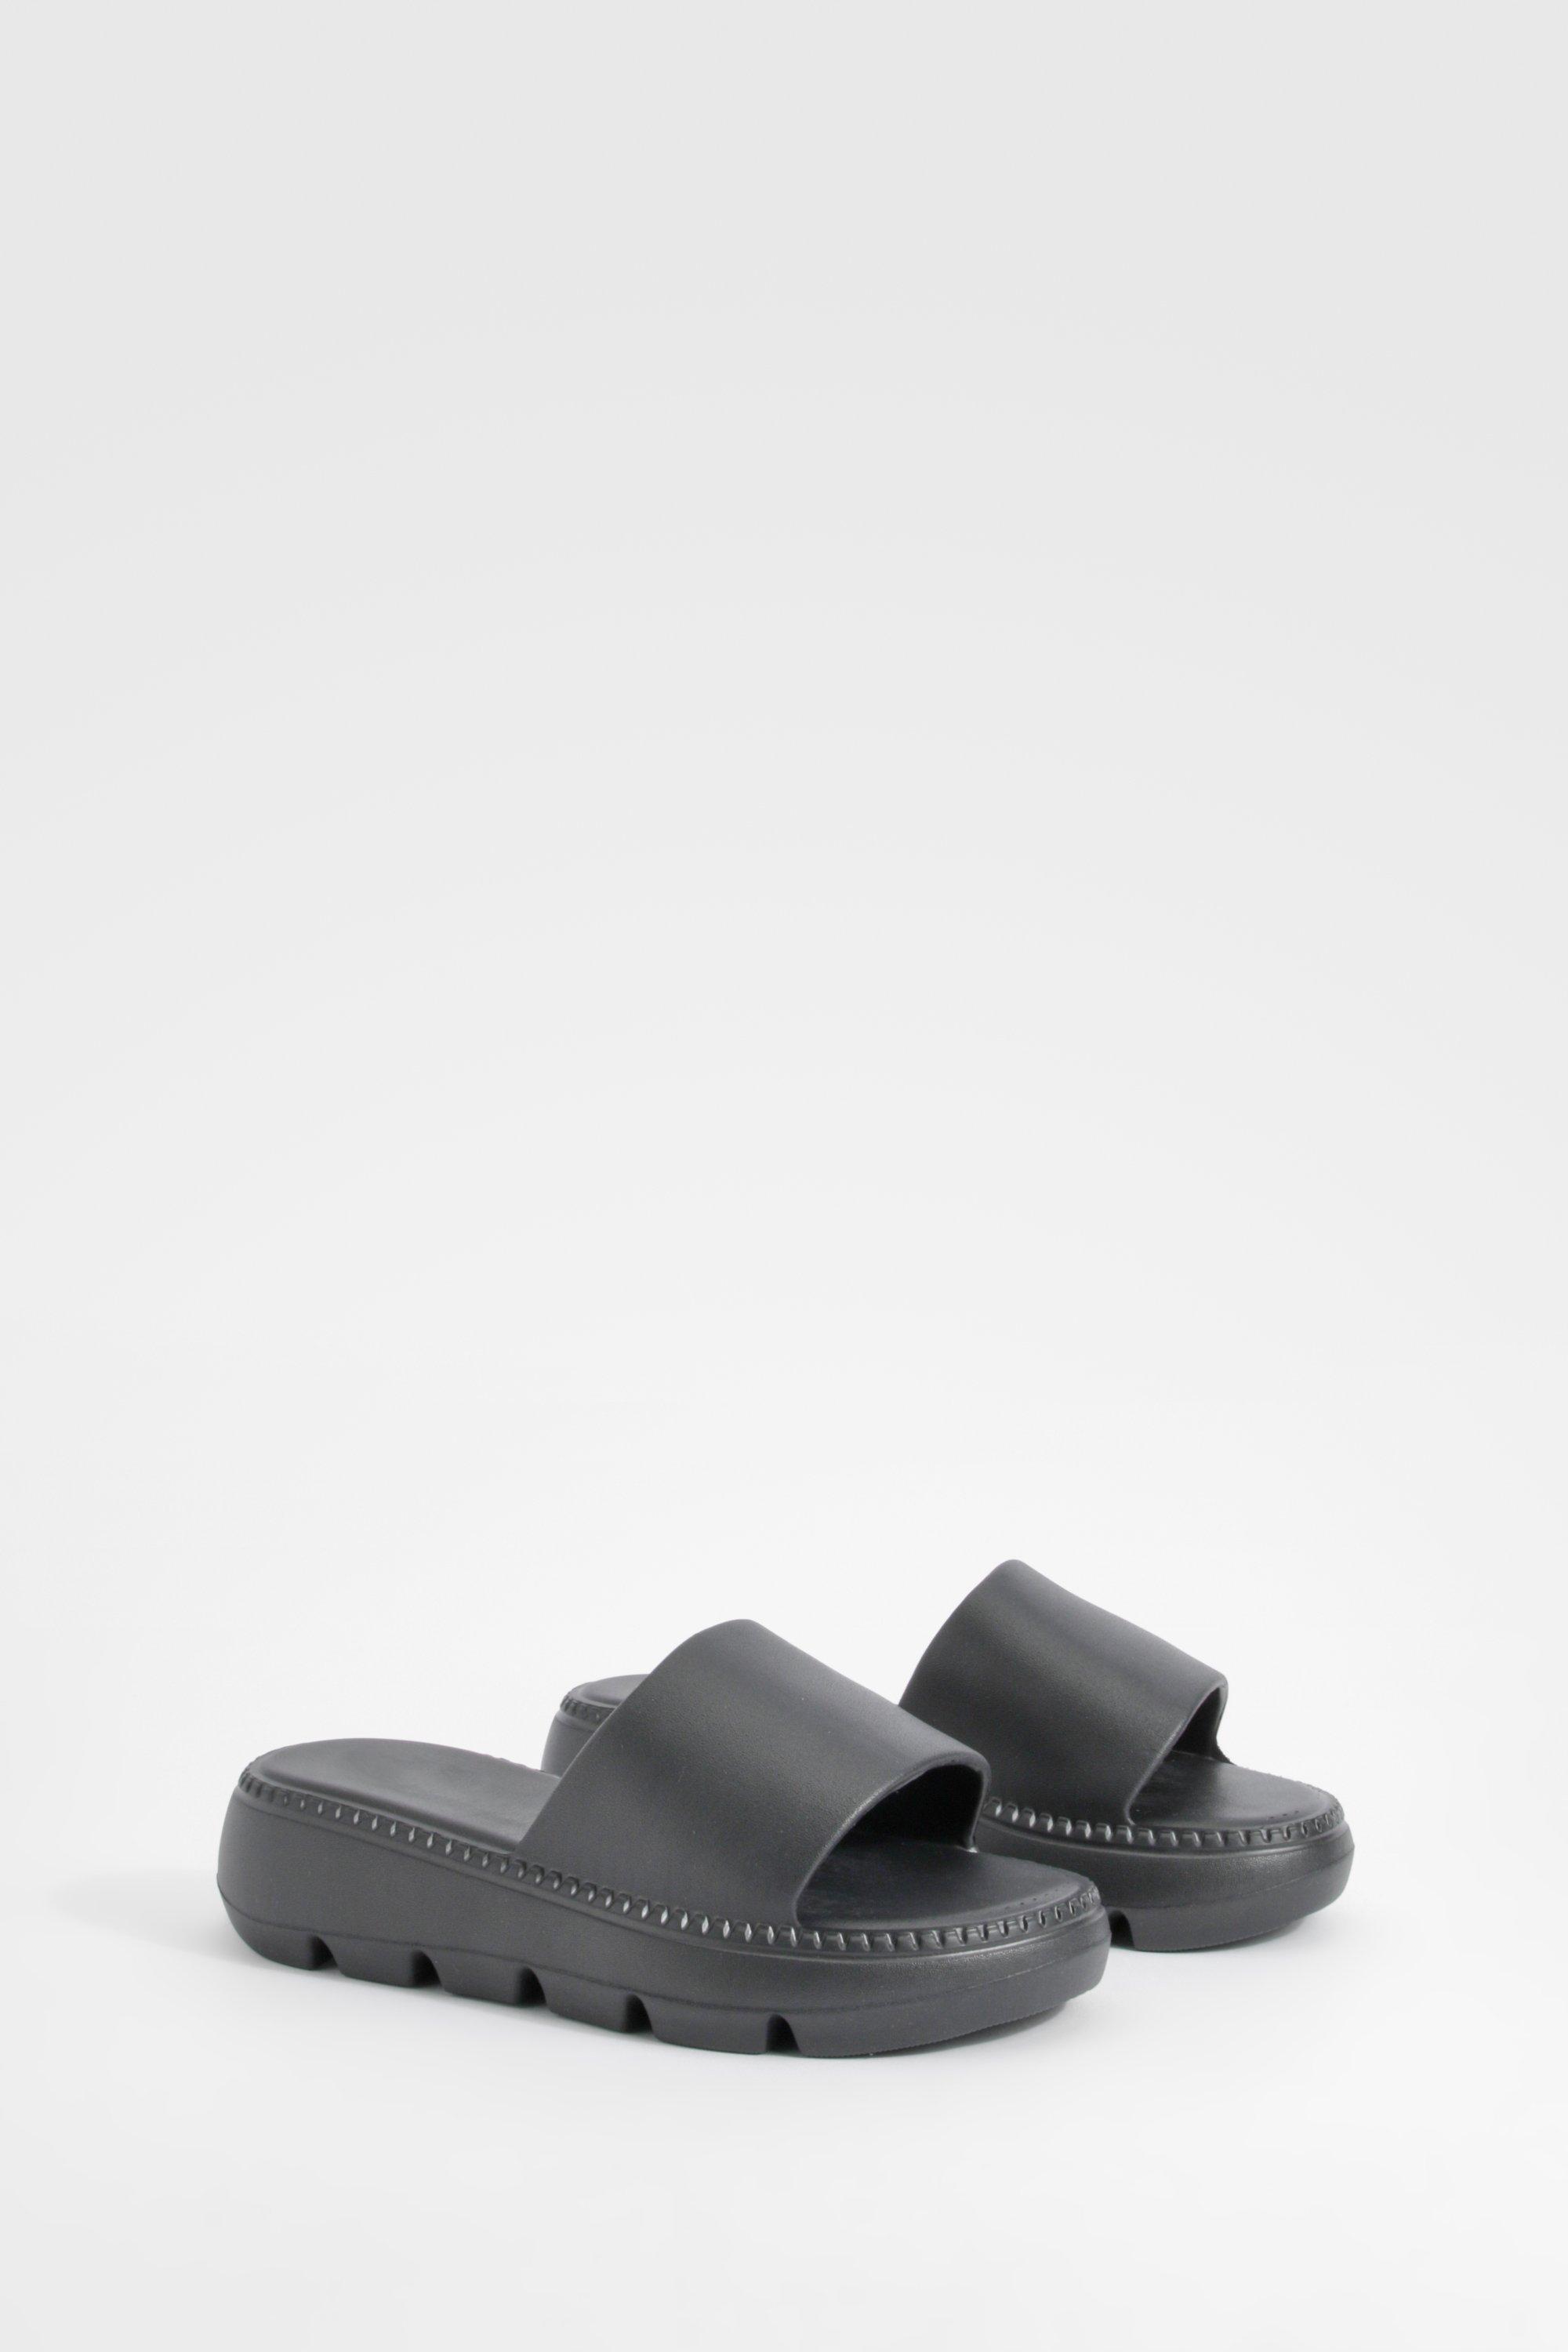 Image of Chunky Cleated Sole Sliders, Nero